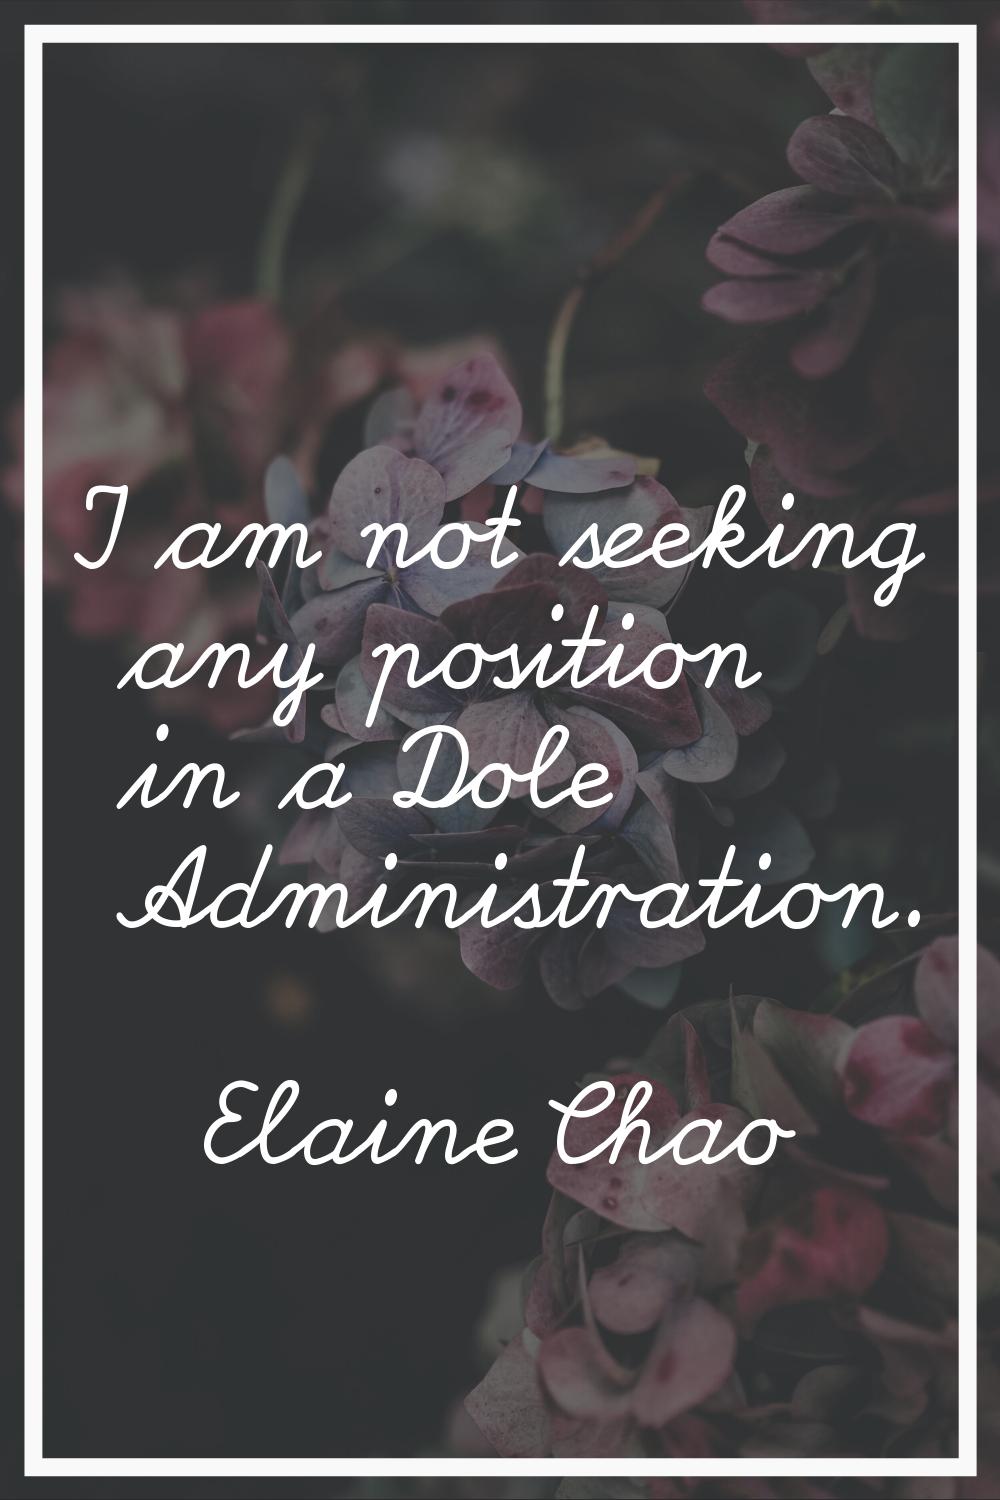 I am not seeking any position in a Dole Administration.